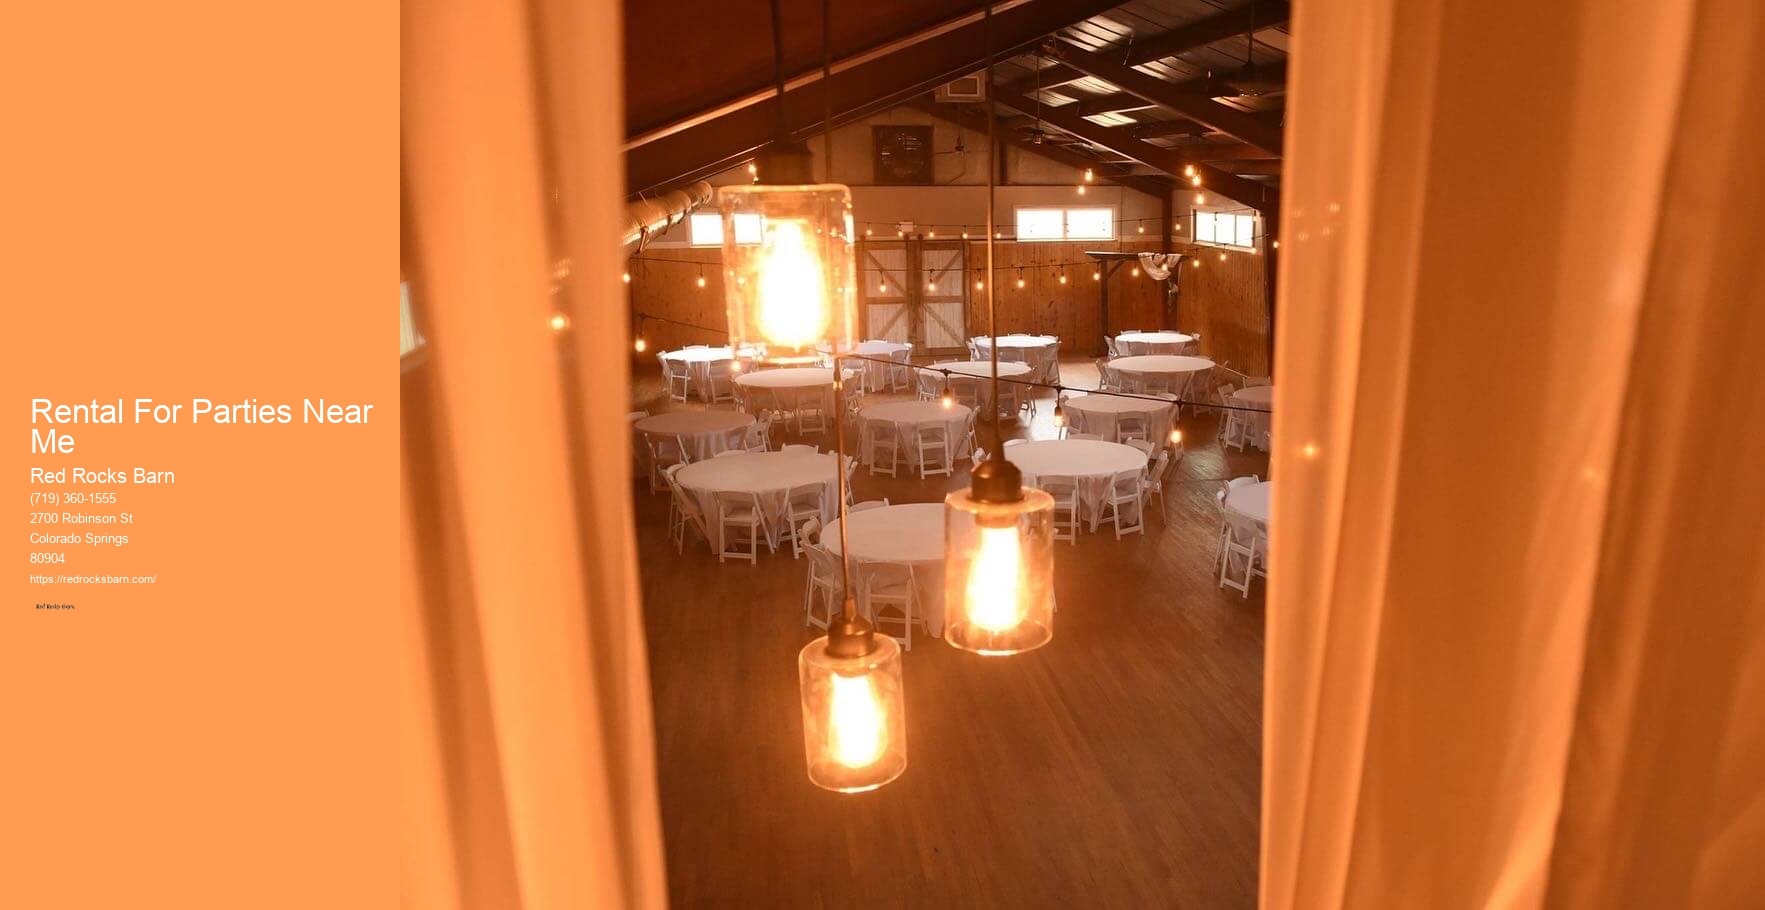 Rental For Parties Near Me